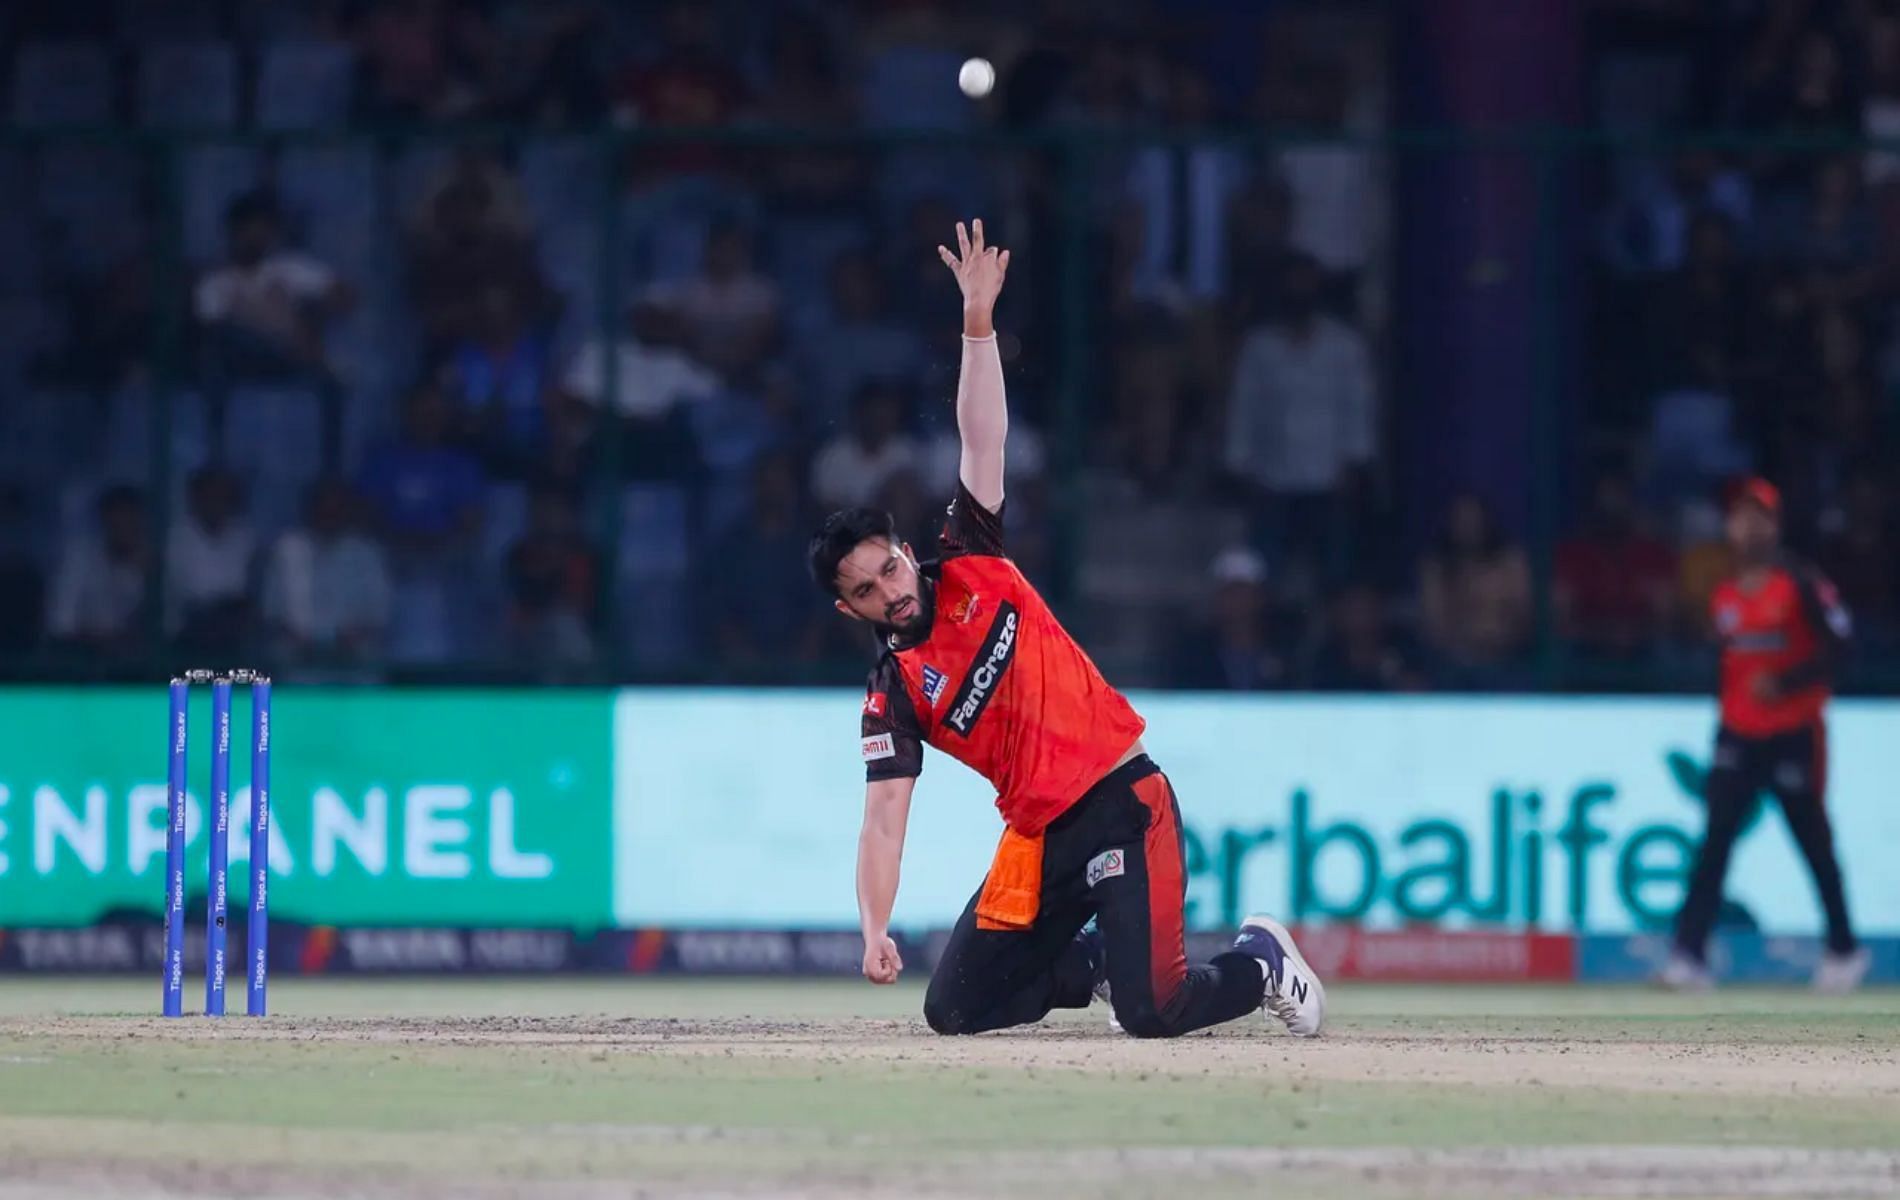 Mayank Markande has impressed many with his performances this season. (Pic: IPLT20.com)